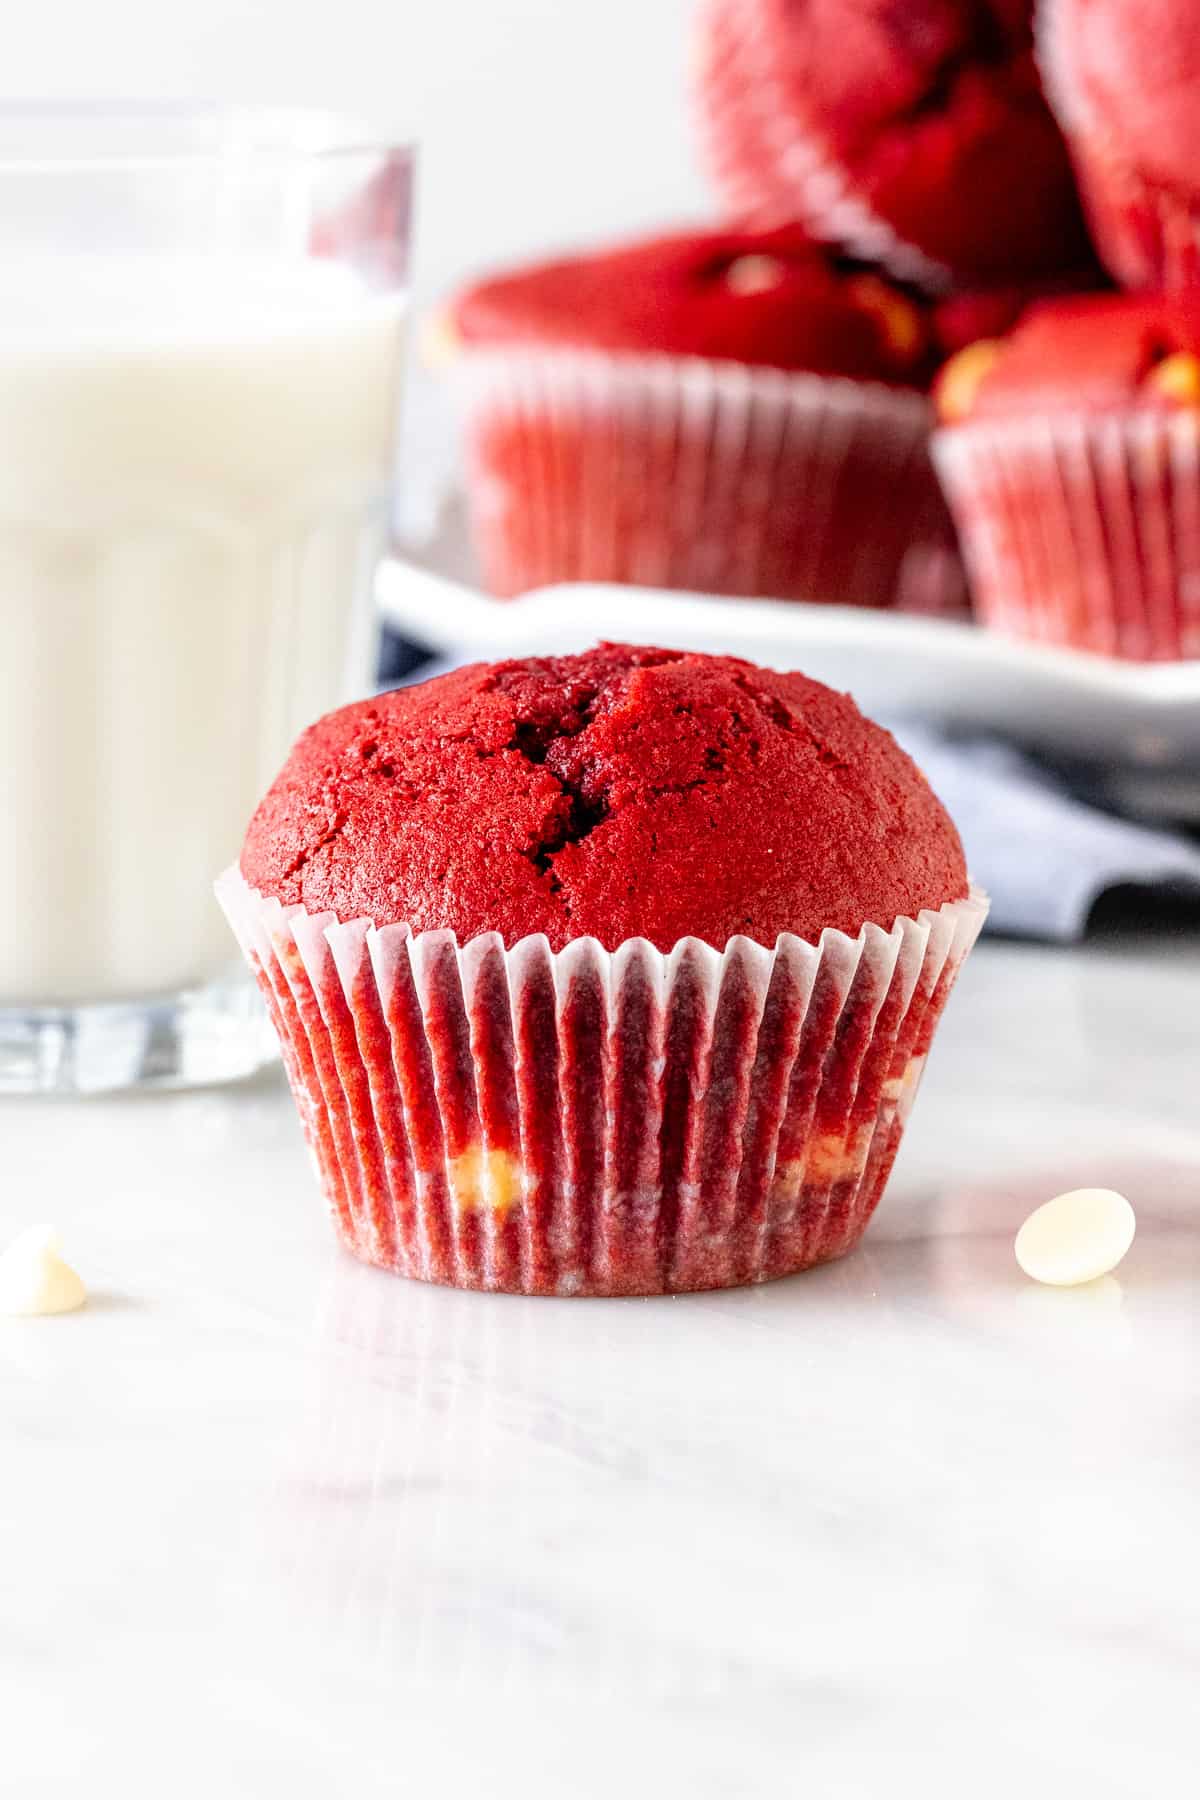 Red velvet chocolate chip muffin with glass of milk